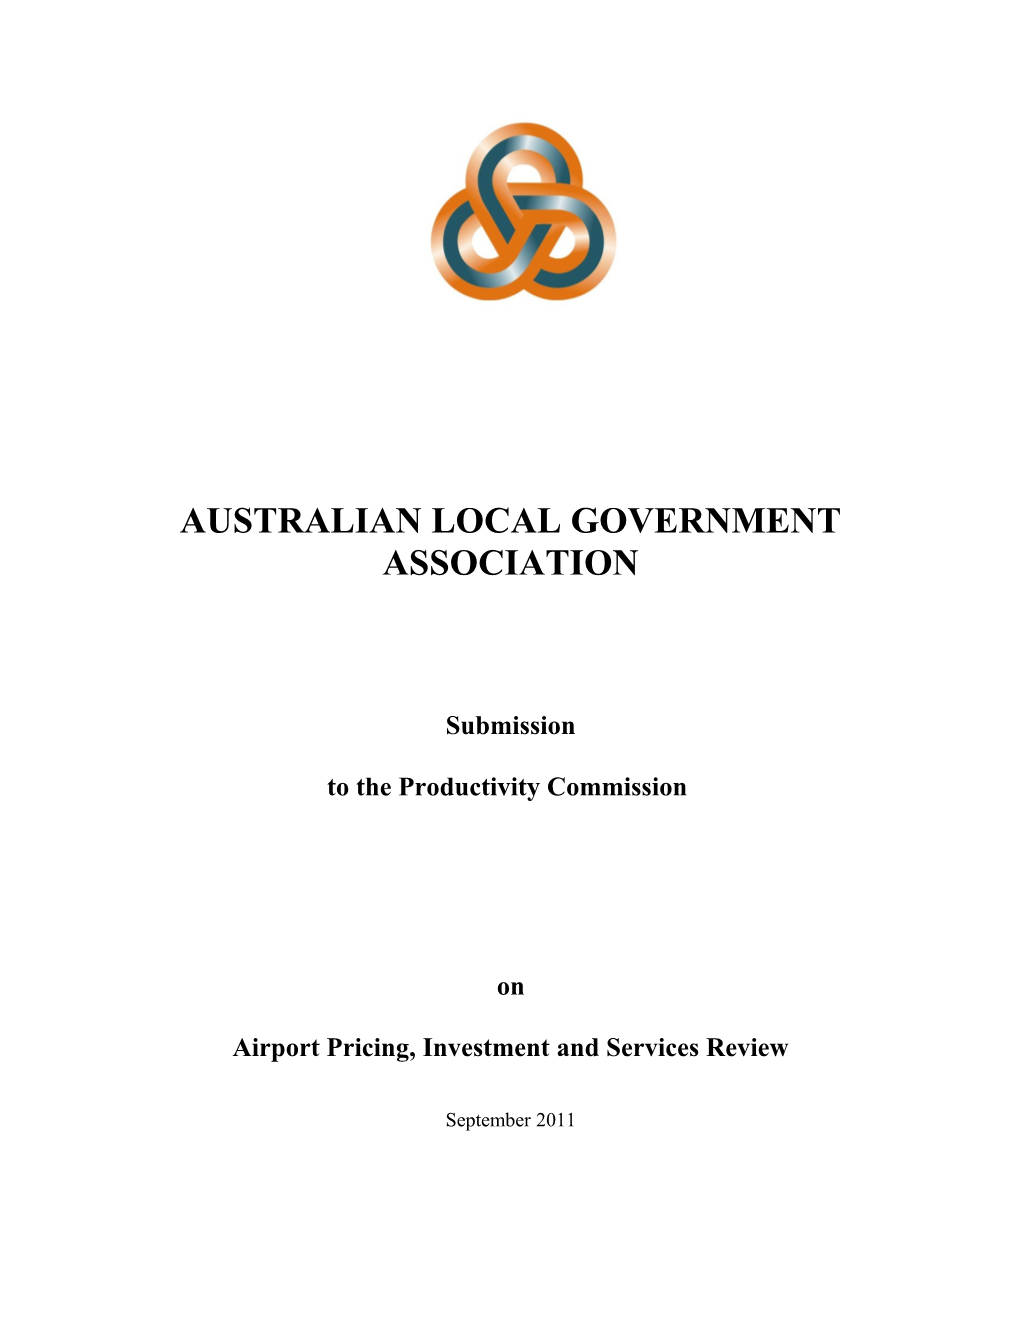 Submission DR90 - Australian Local Government Association - Economic Regulation of Airport